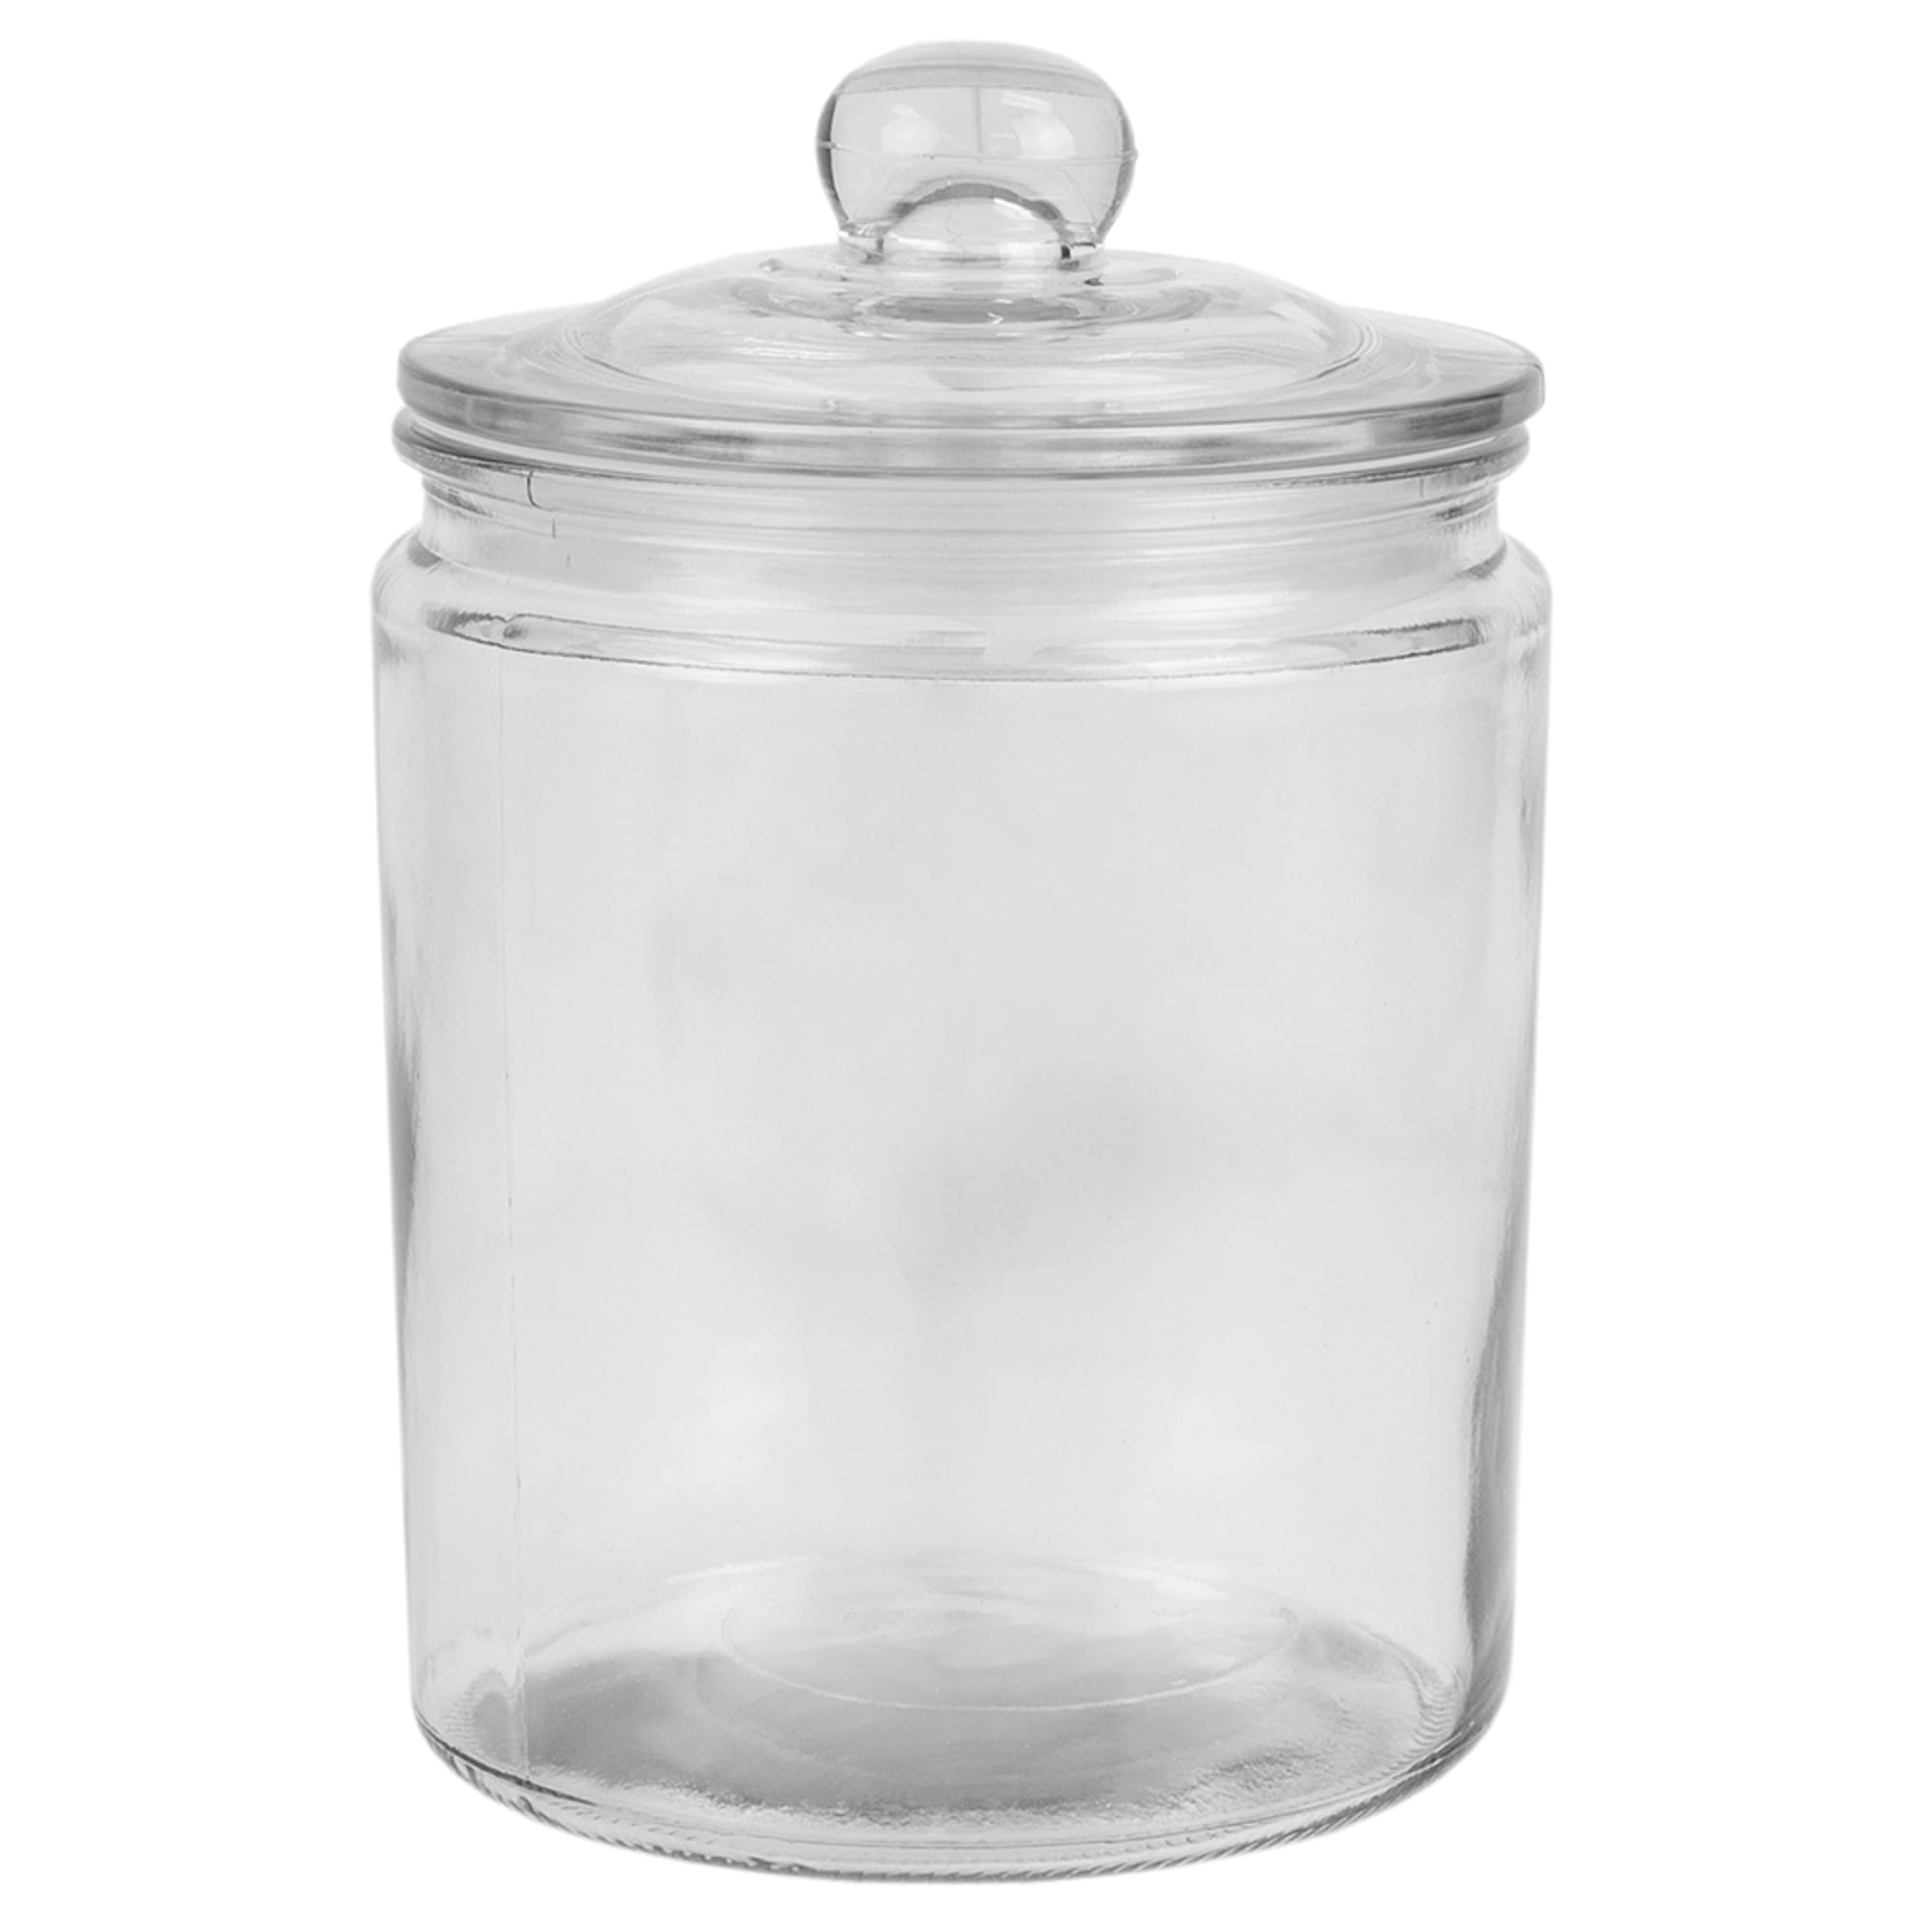 Home Basics Renaissance Collection Medium Glass Jar with Easy Grab Knob Handles, Clear $7.00 EACH, CASE PACK OF 6